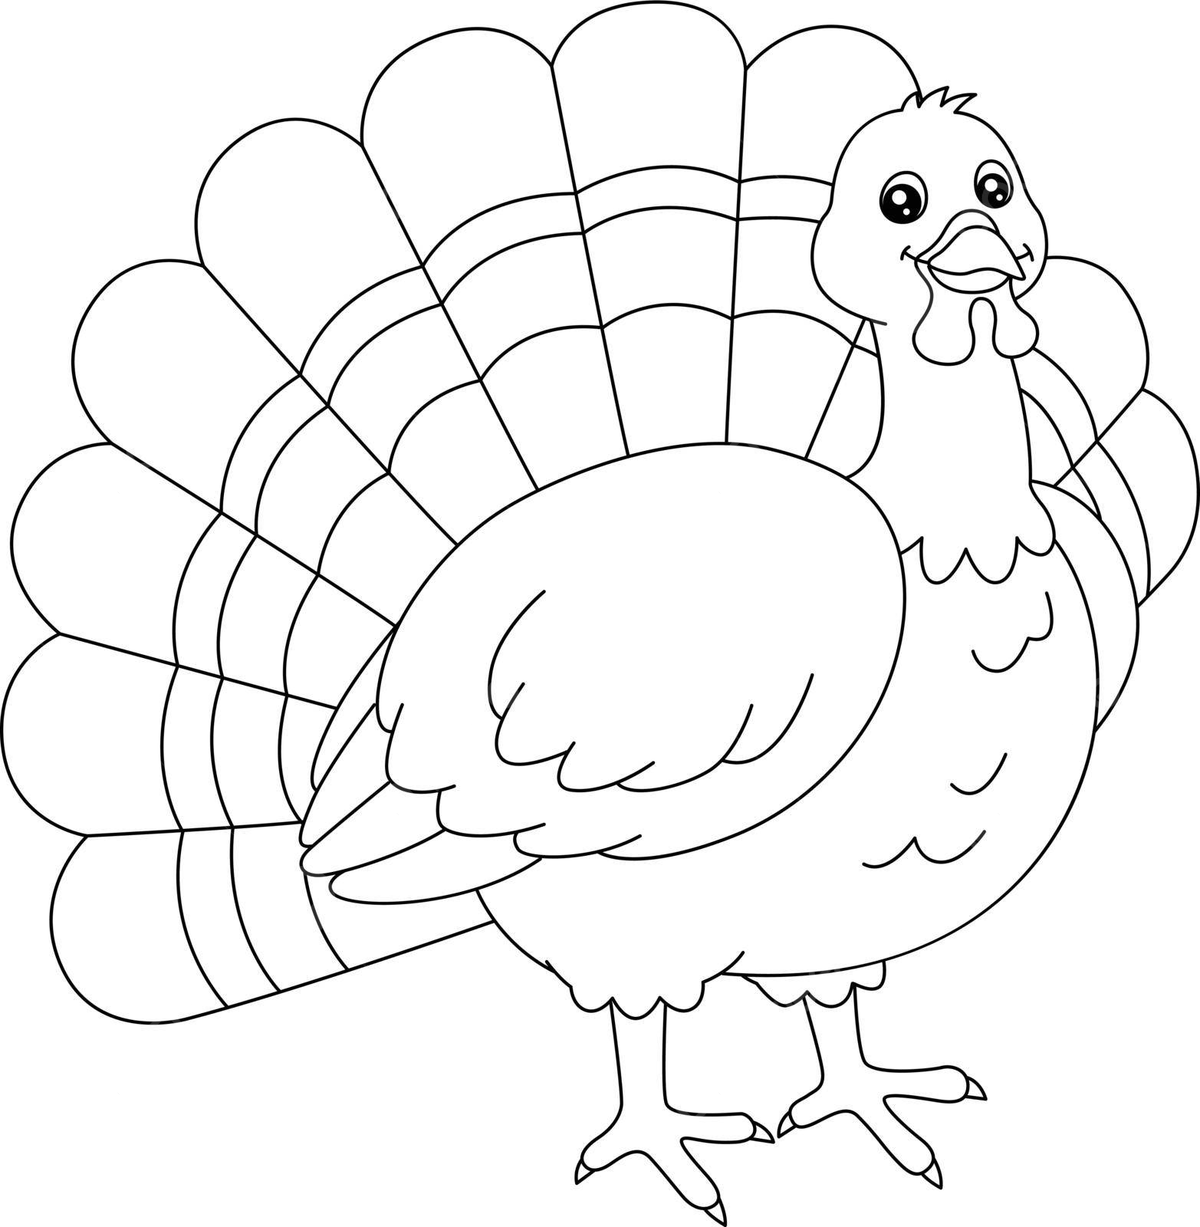 Turkey coloring page isolated for kids colour vector design vector turkey drawing key drawing ring drawing png and vector with transparent background for free download